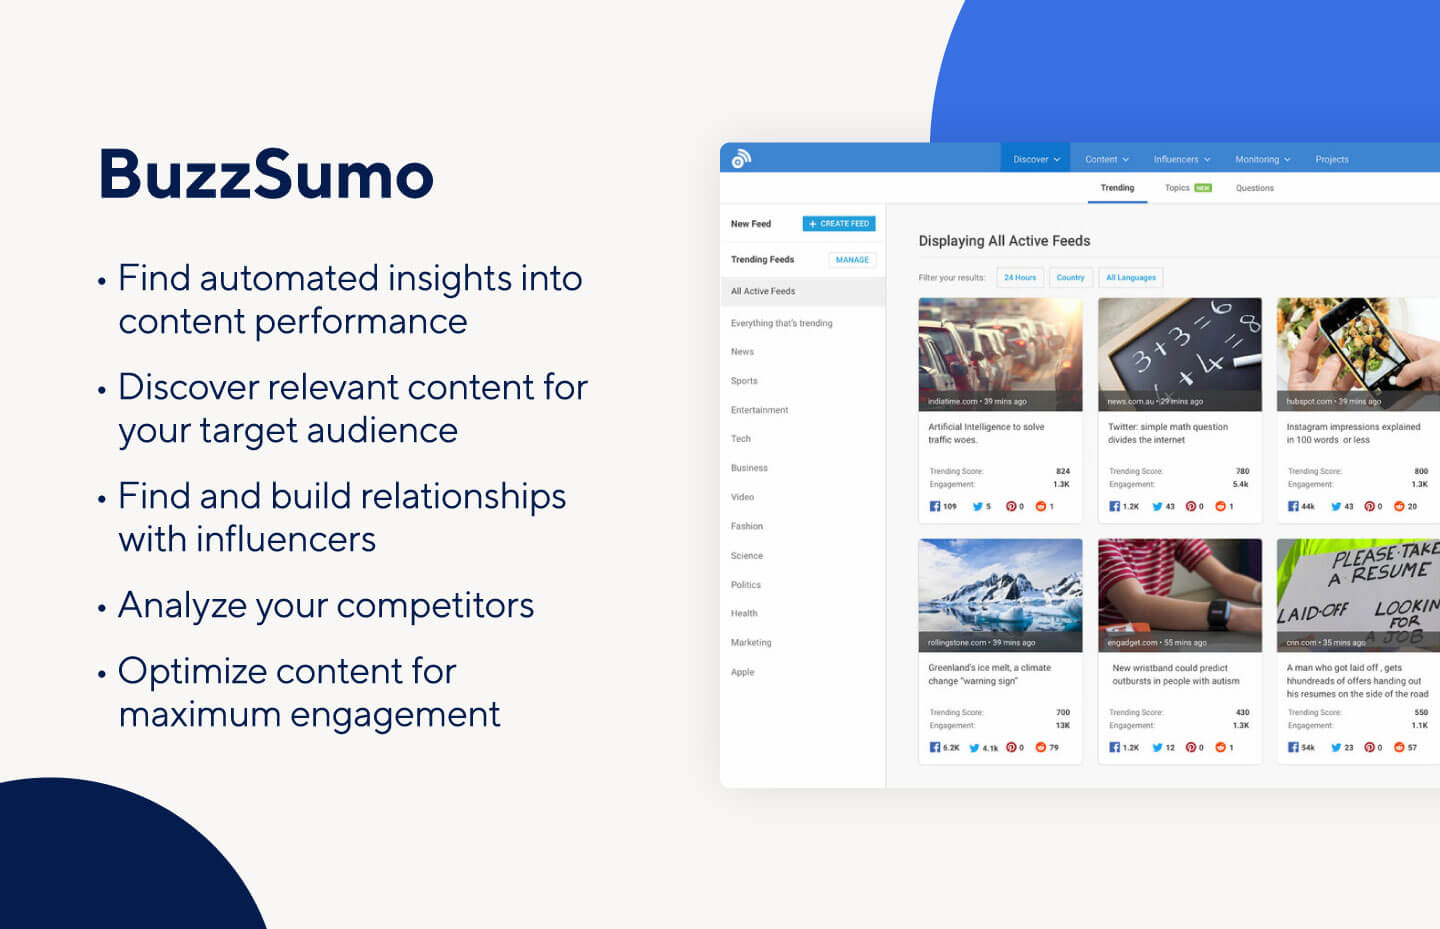 Use BuzzSumo to find industry-related content and performance insights.